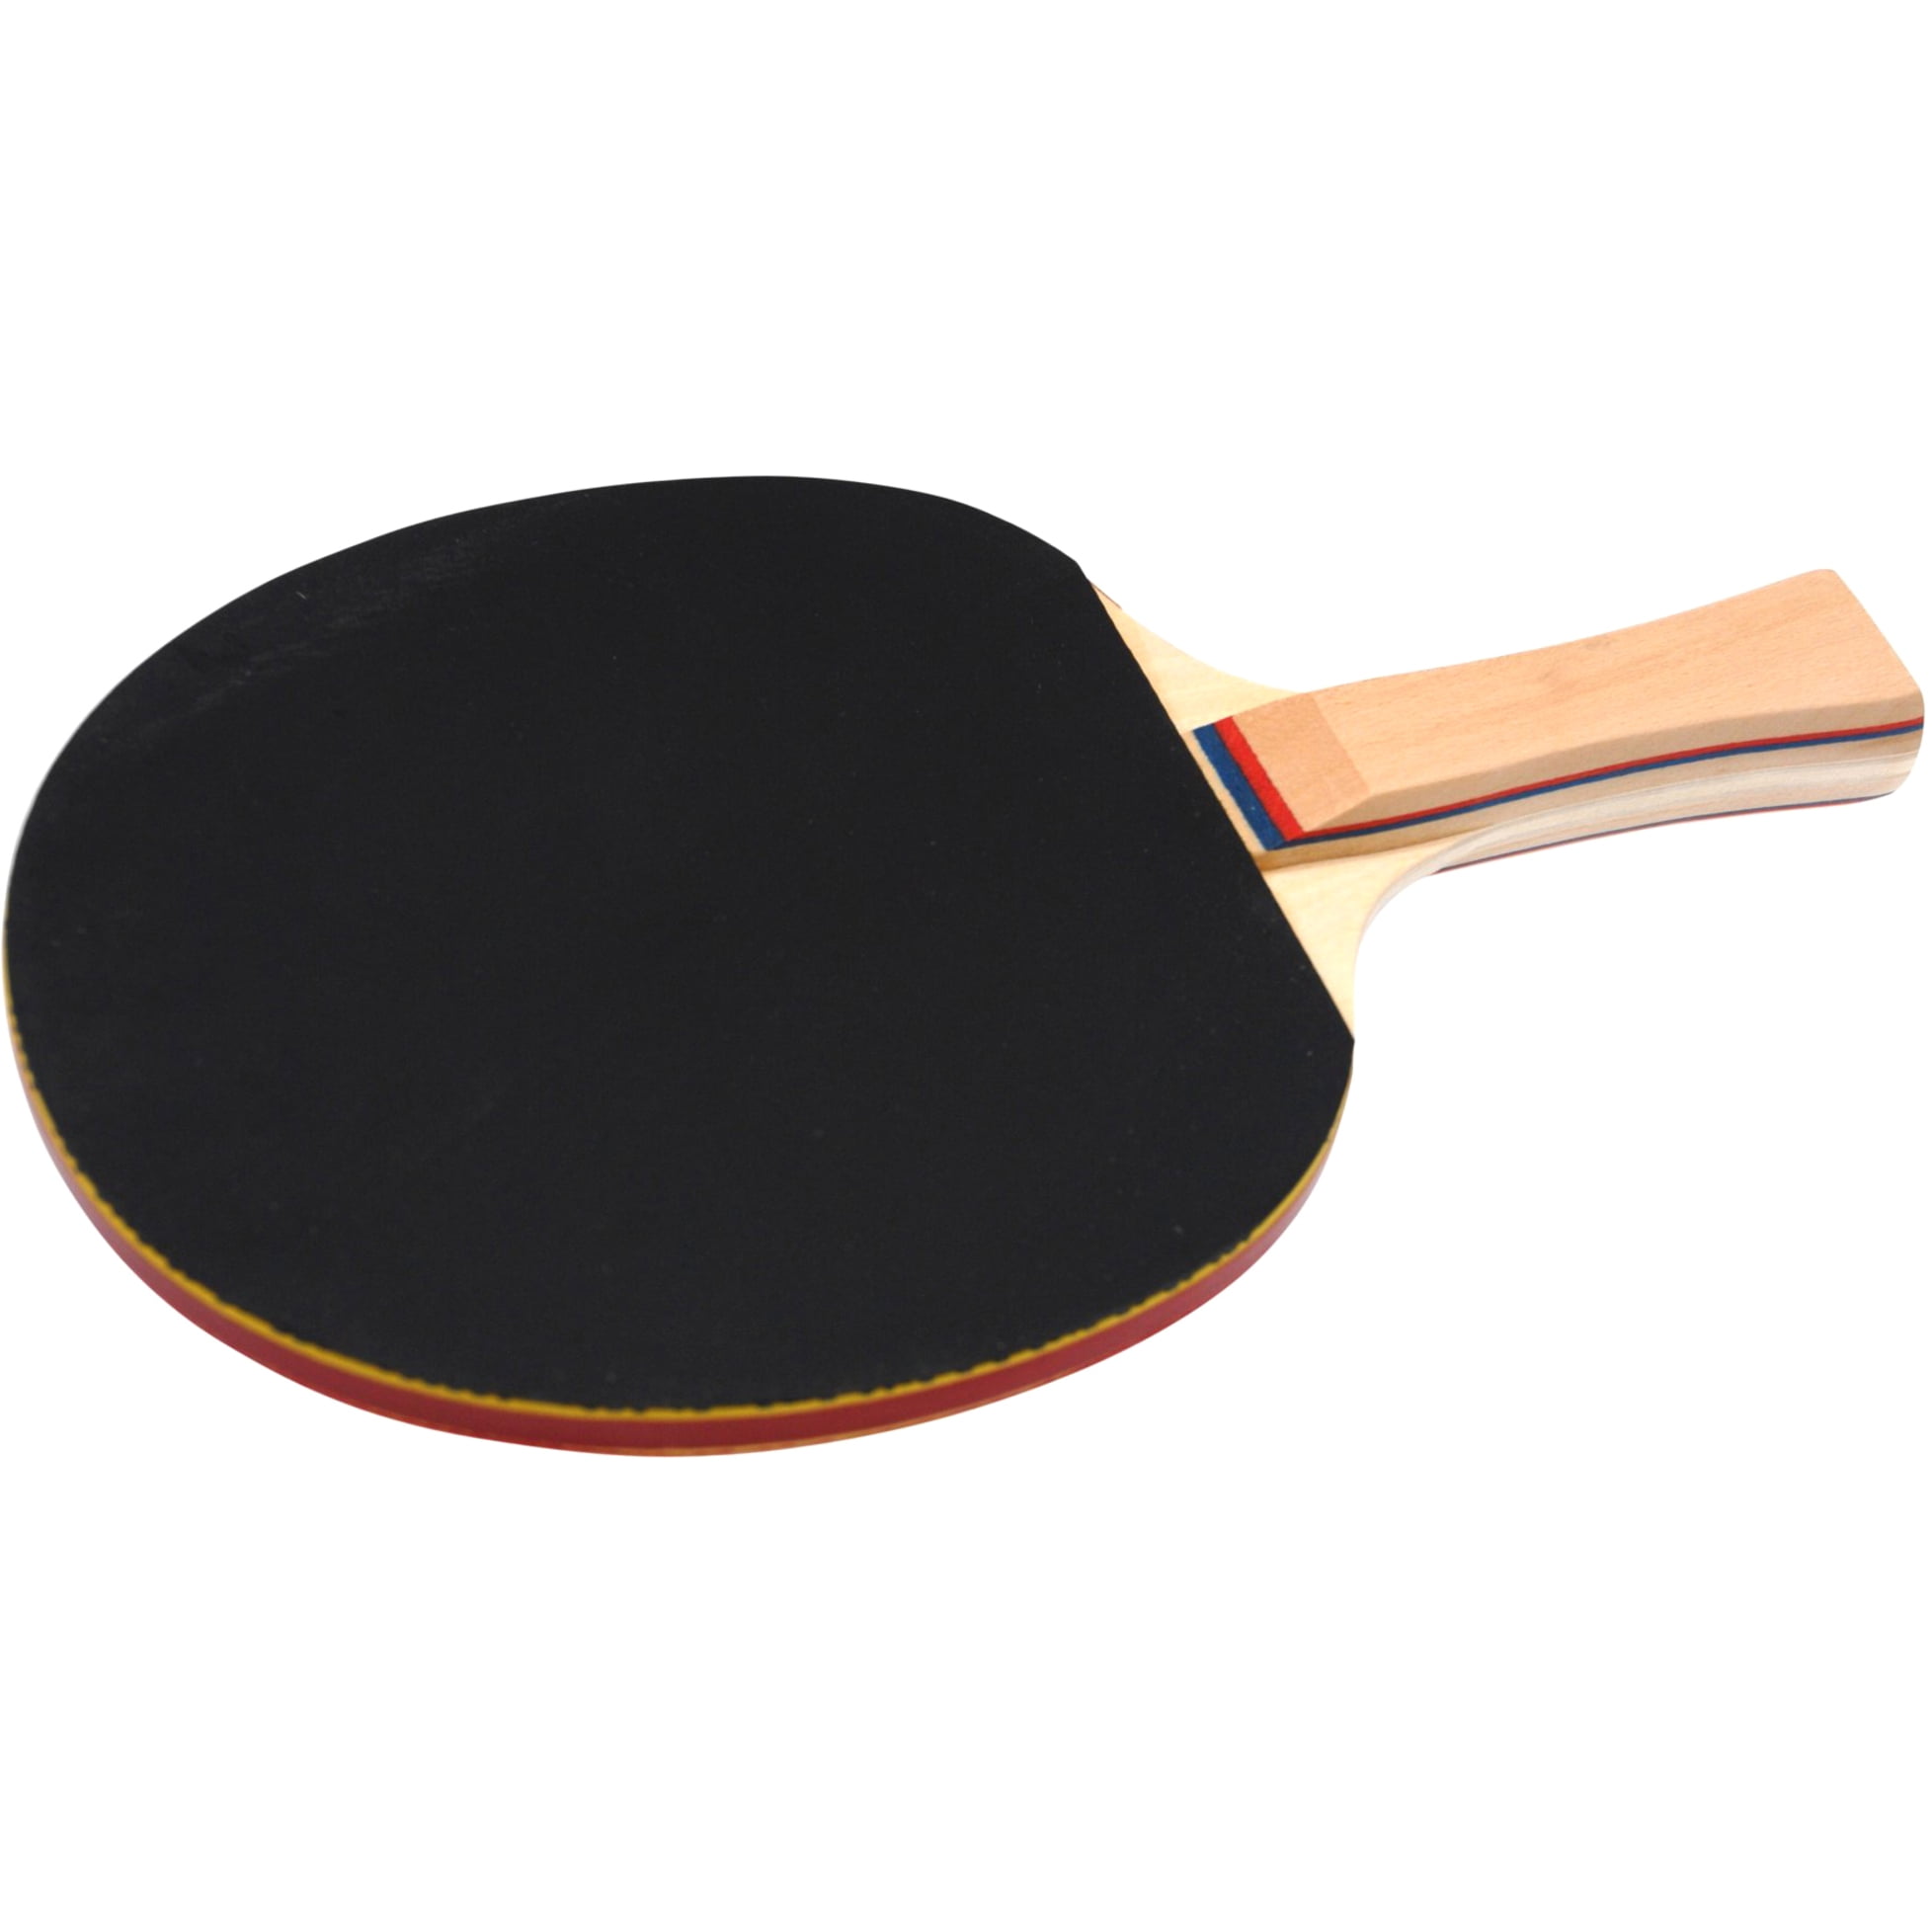 Stiga Ping Pong Table Tennis Paddles Aspire Racquets T1220 for sale online 